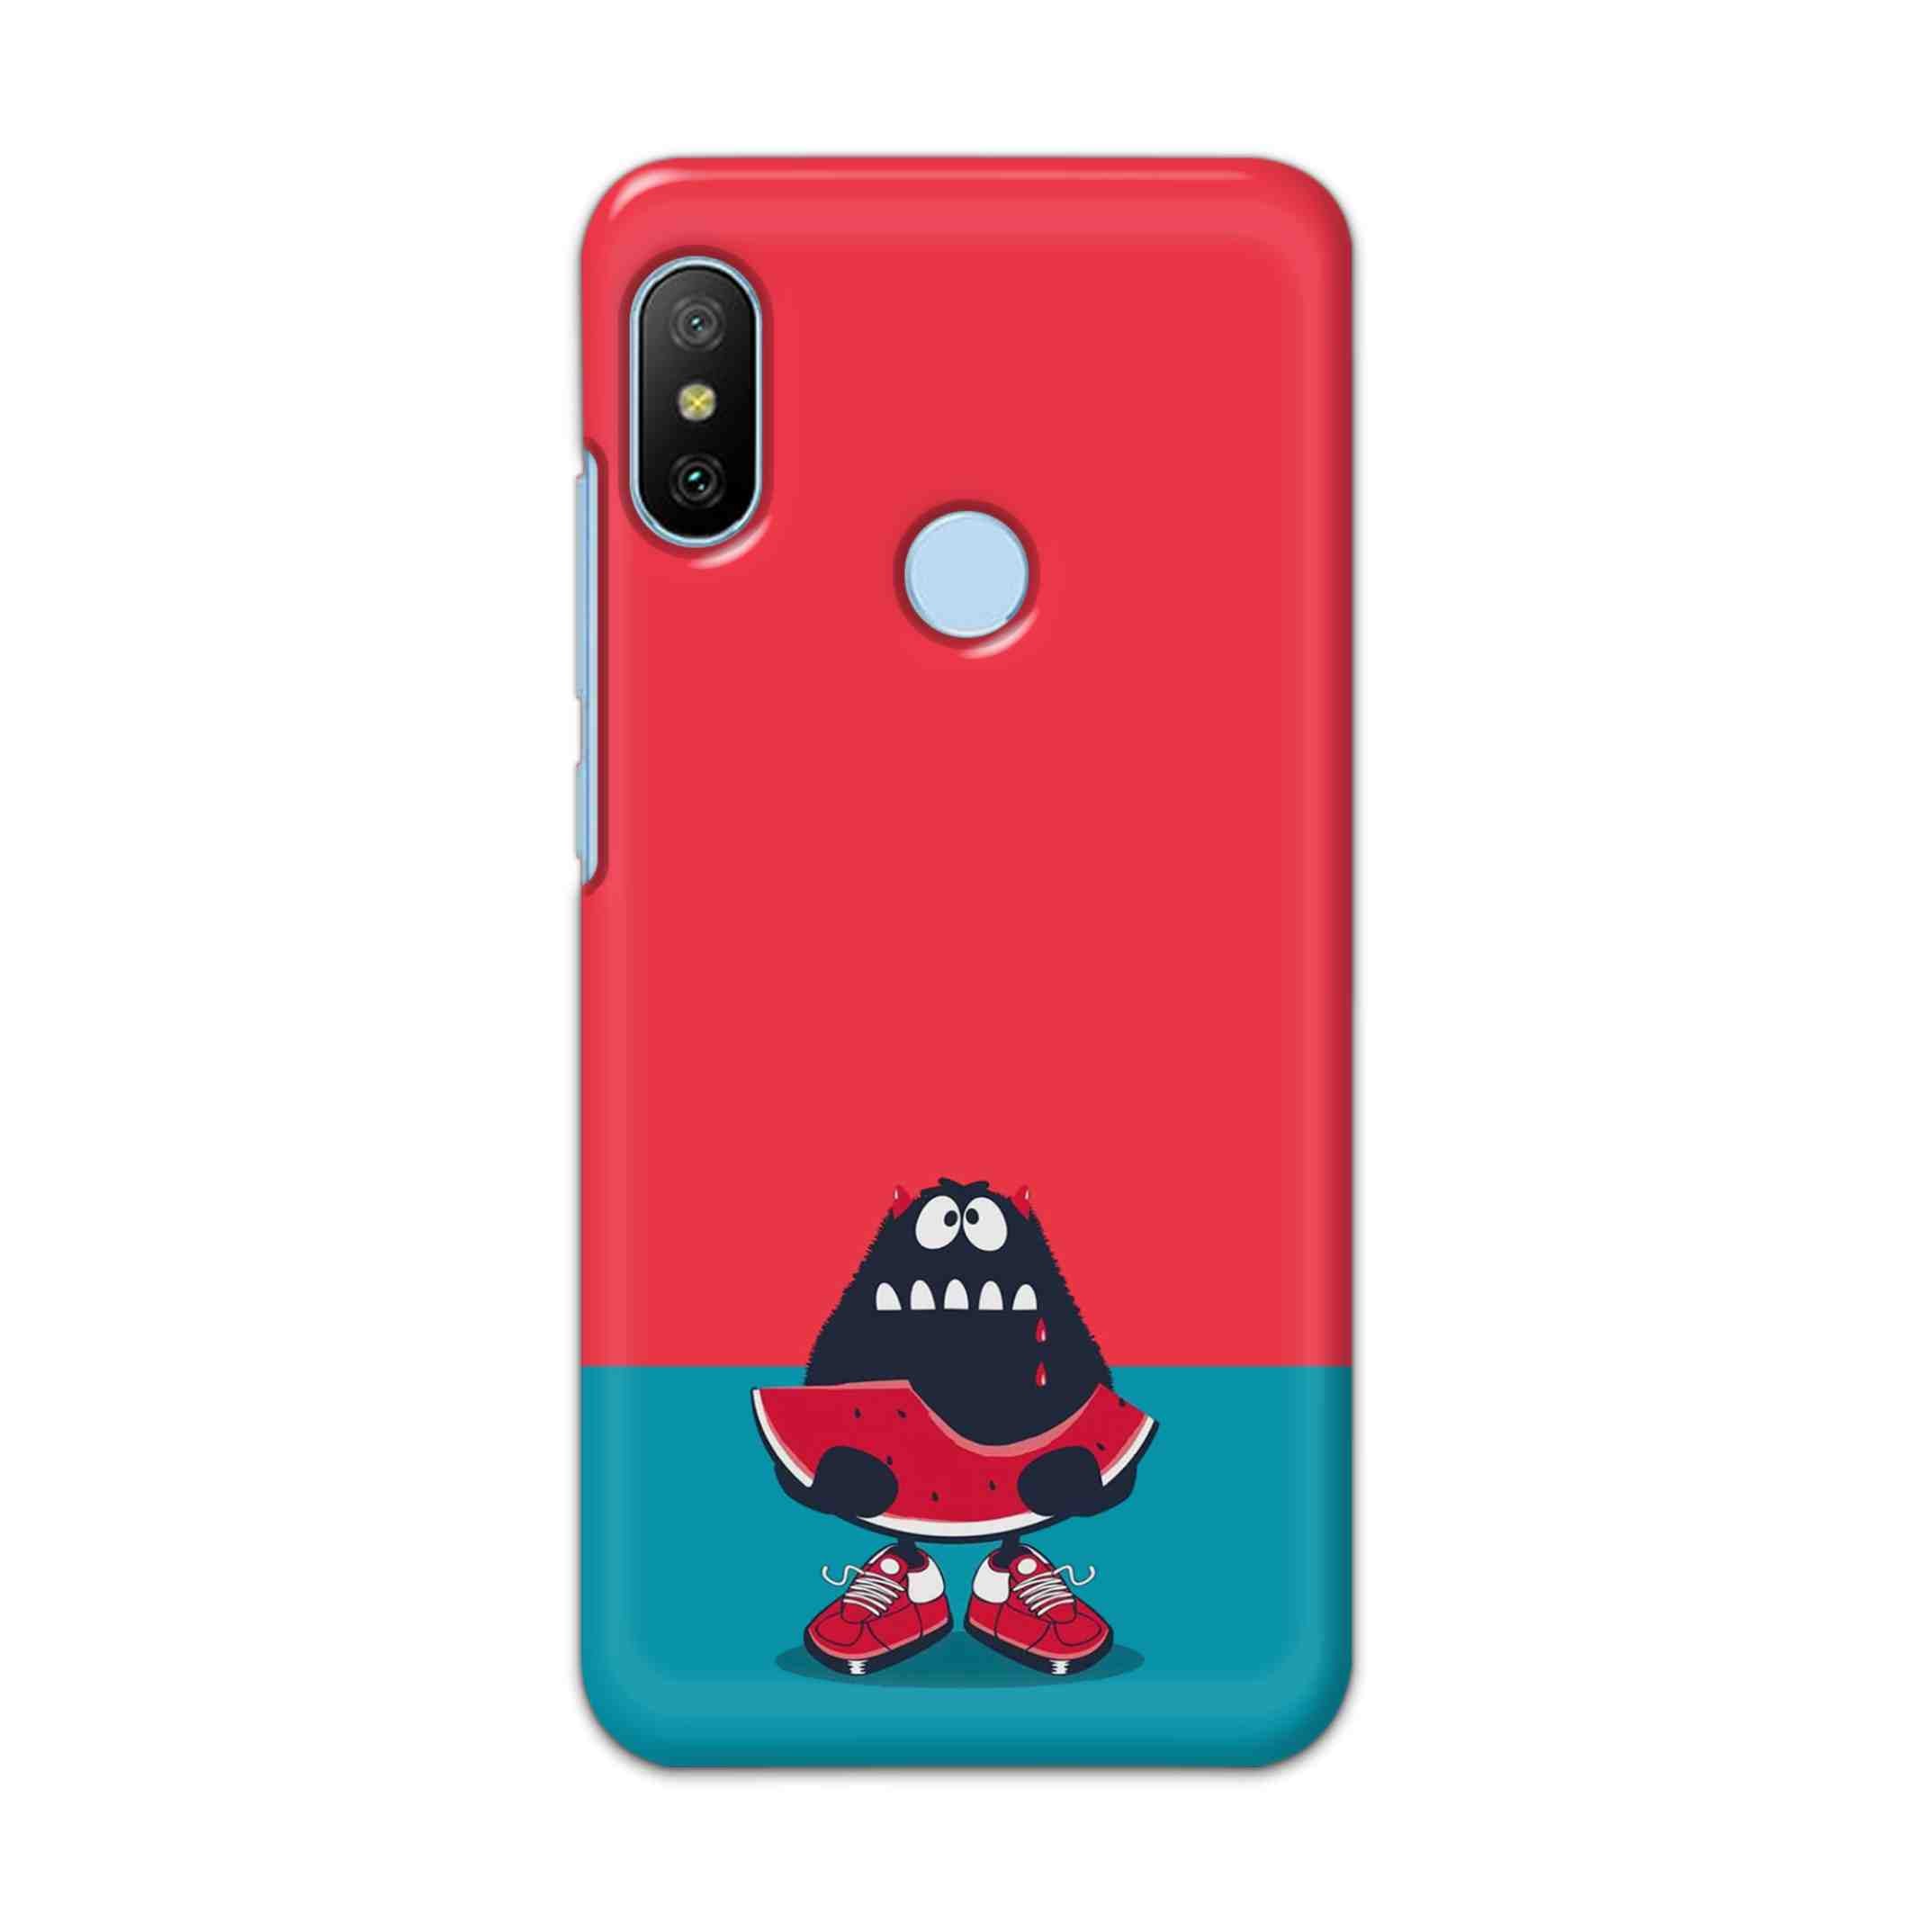 Buy Watermellon Hard Back Mobile Phone Case/Cover For Xiaomi Redmi 6 Pro Online